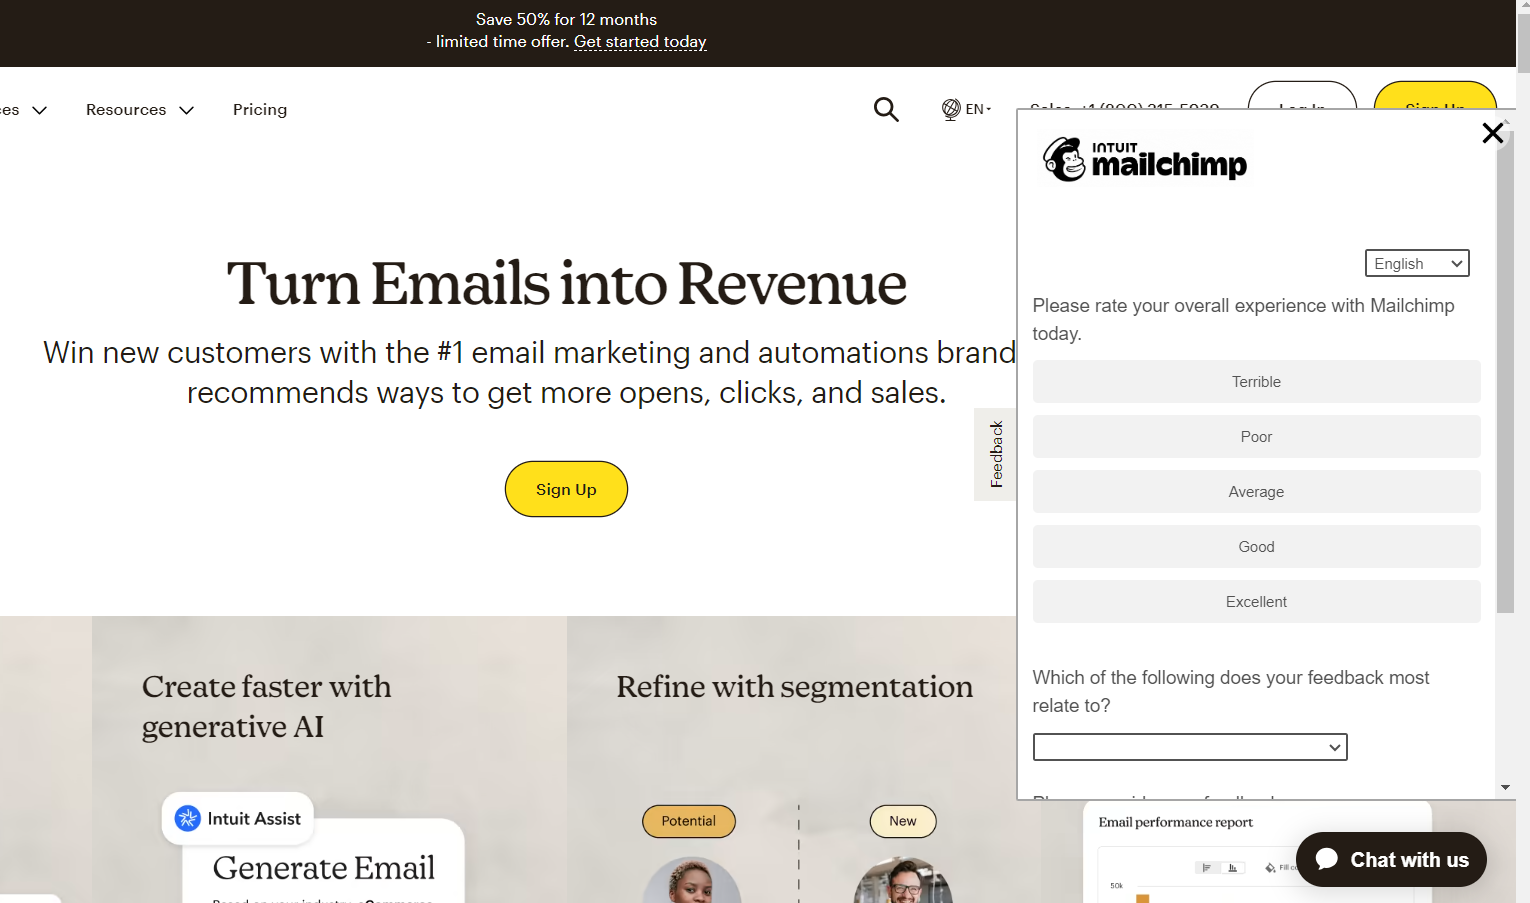 example below featuring Mailchimp, you can observe how they use website surveys